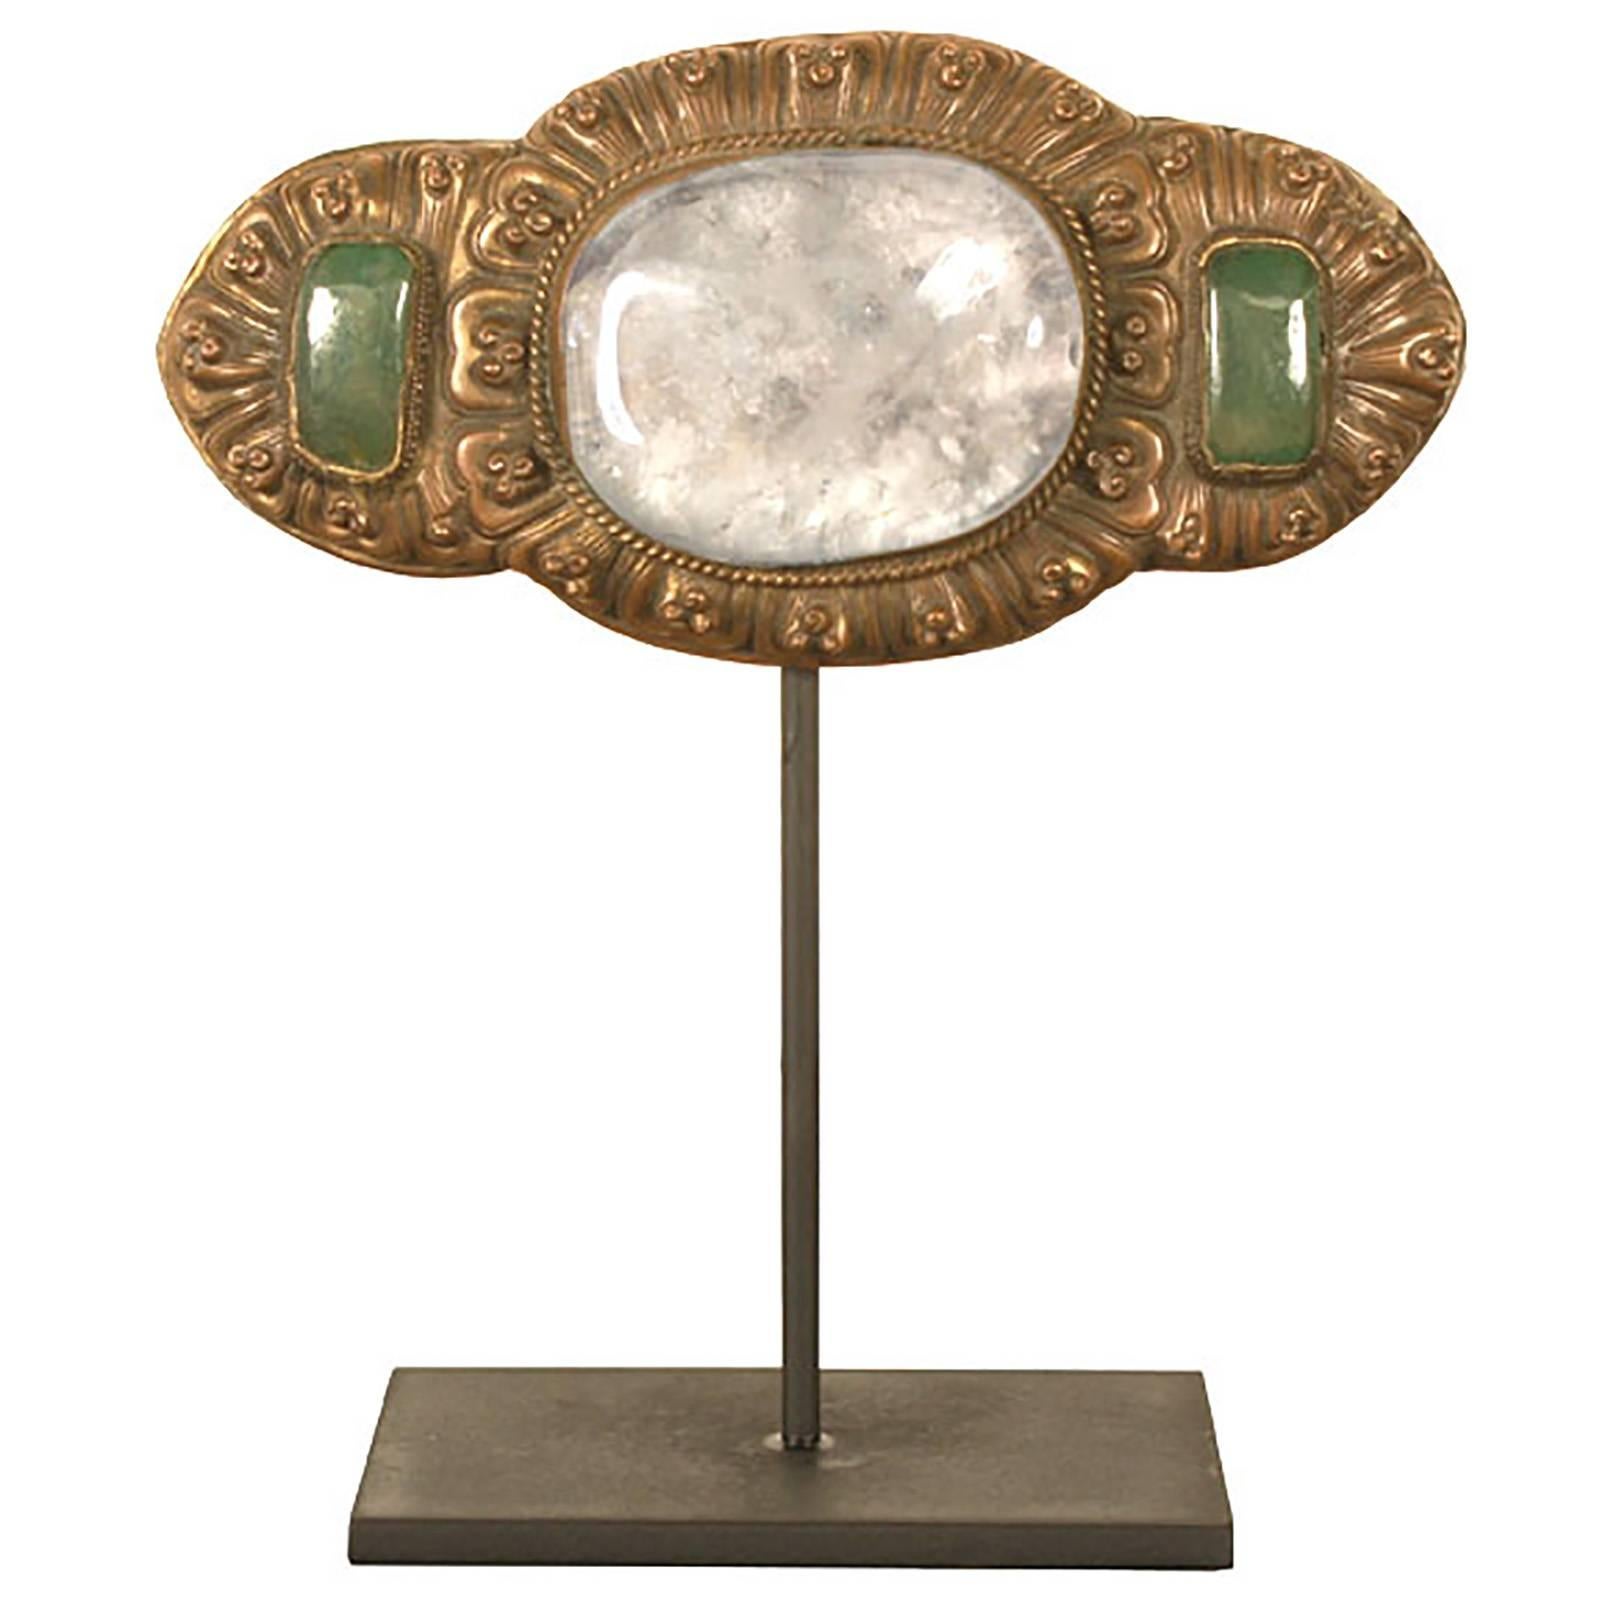 Chinese Belt Buckle with Rock Crystal and Green Quartz